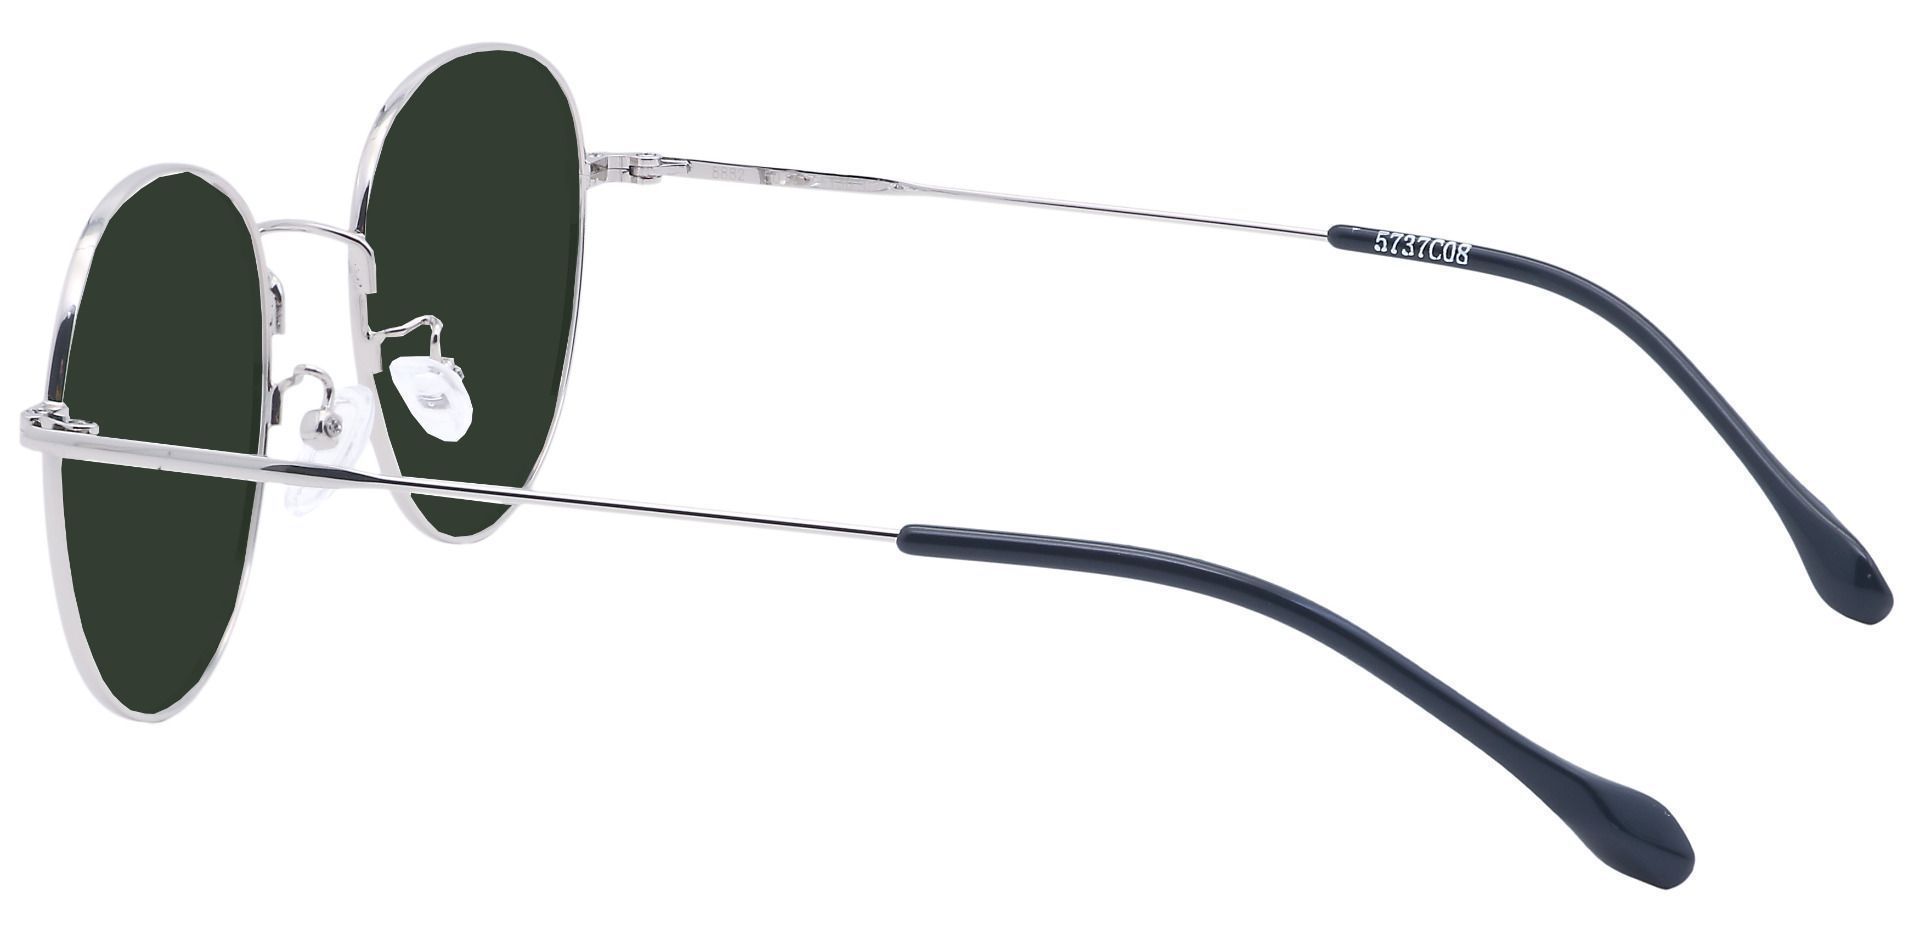 Miller Oval Lined Bifocal Sunglasses - Gray Frame With Green Lenses